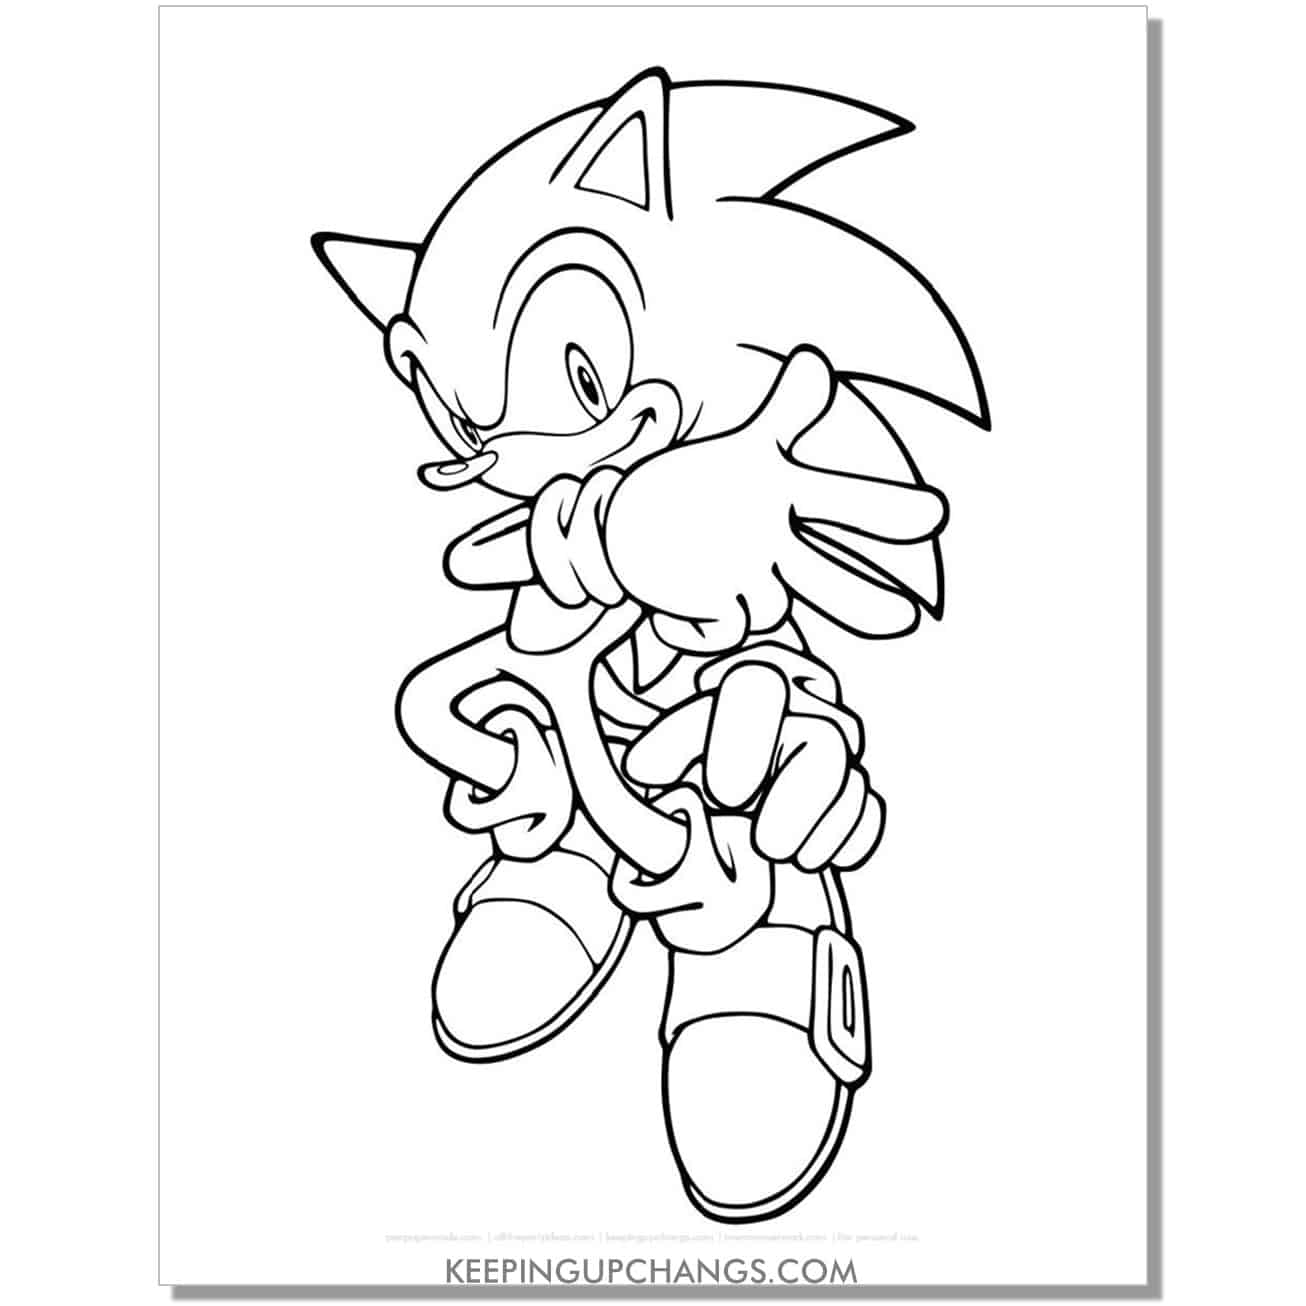 sonic with arm in front, thumb, index, and middle finger out coloring page.